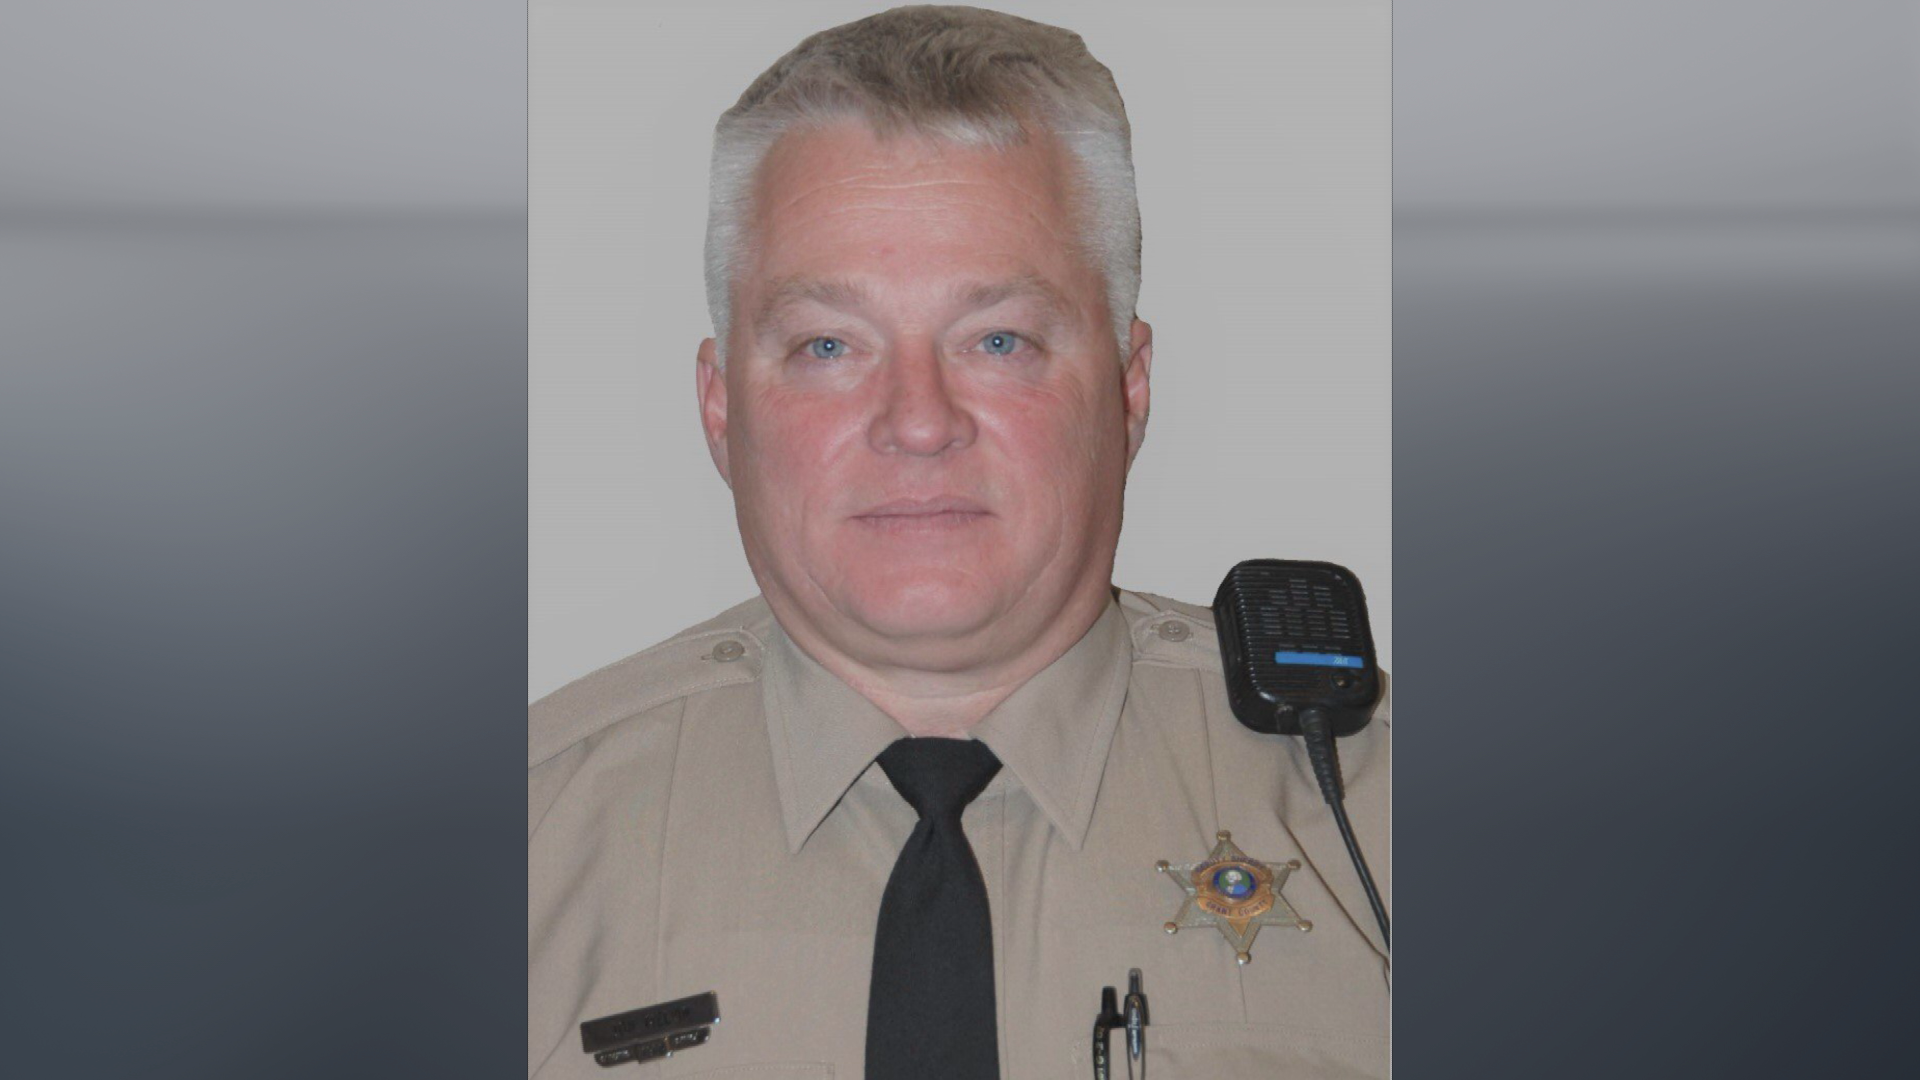 Grant County Deputy Jon Melvin served with the Grant County Sheriff's Office for more than three decades. His death in December was attributed to coronavirus.